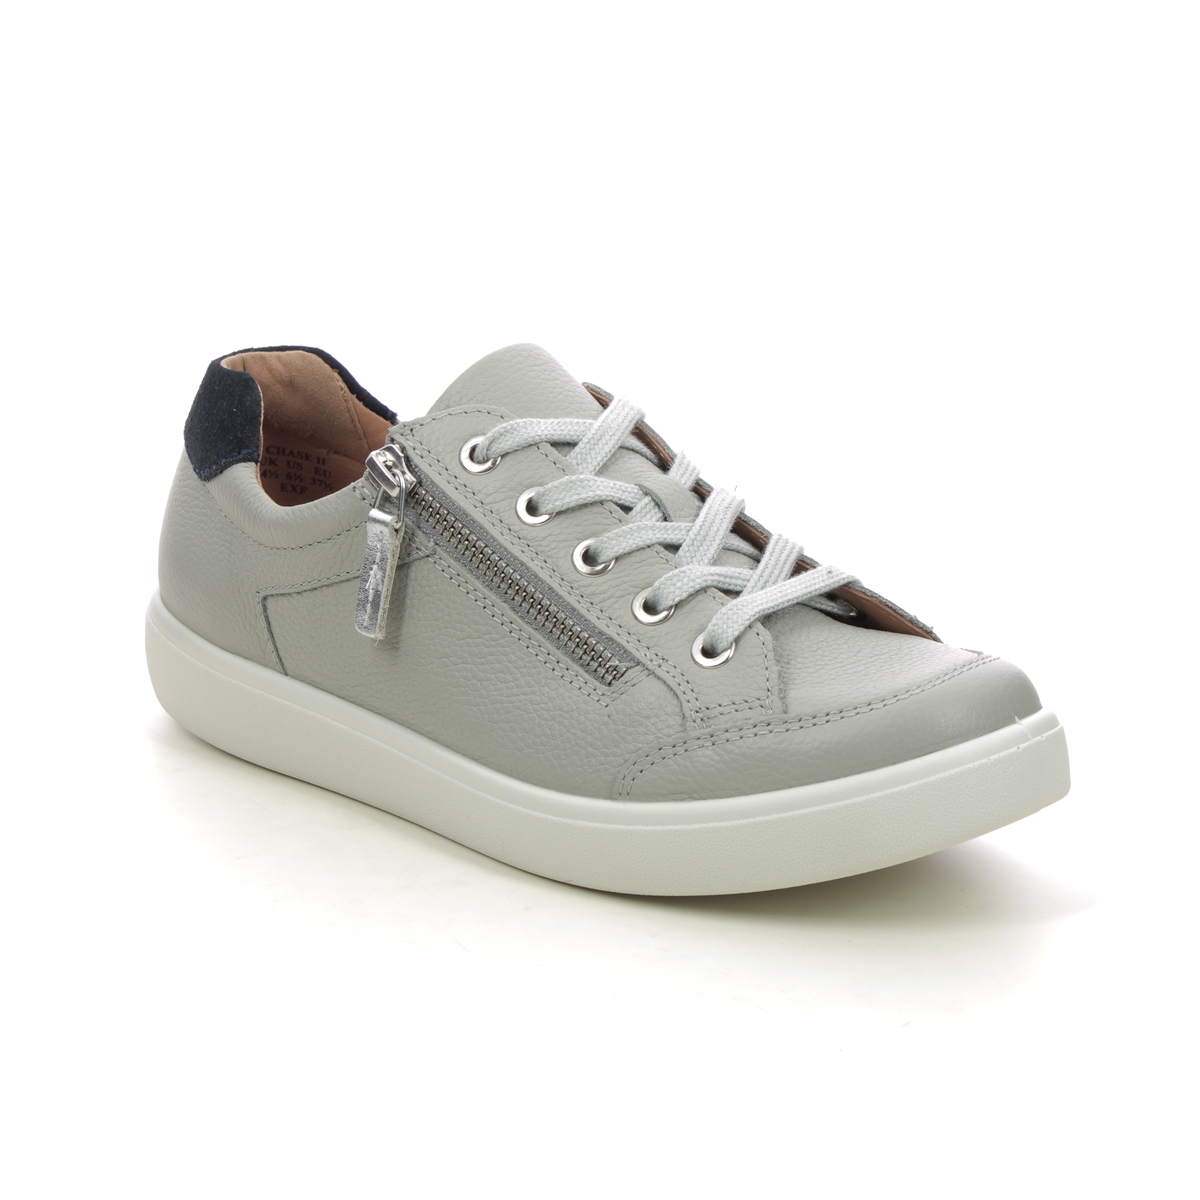 Hotter Chase 2 Wide Light Grey Leather Womens trainers 16116-03 in a Plain Leather in Size 7